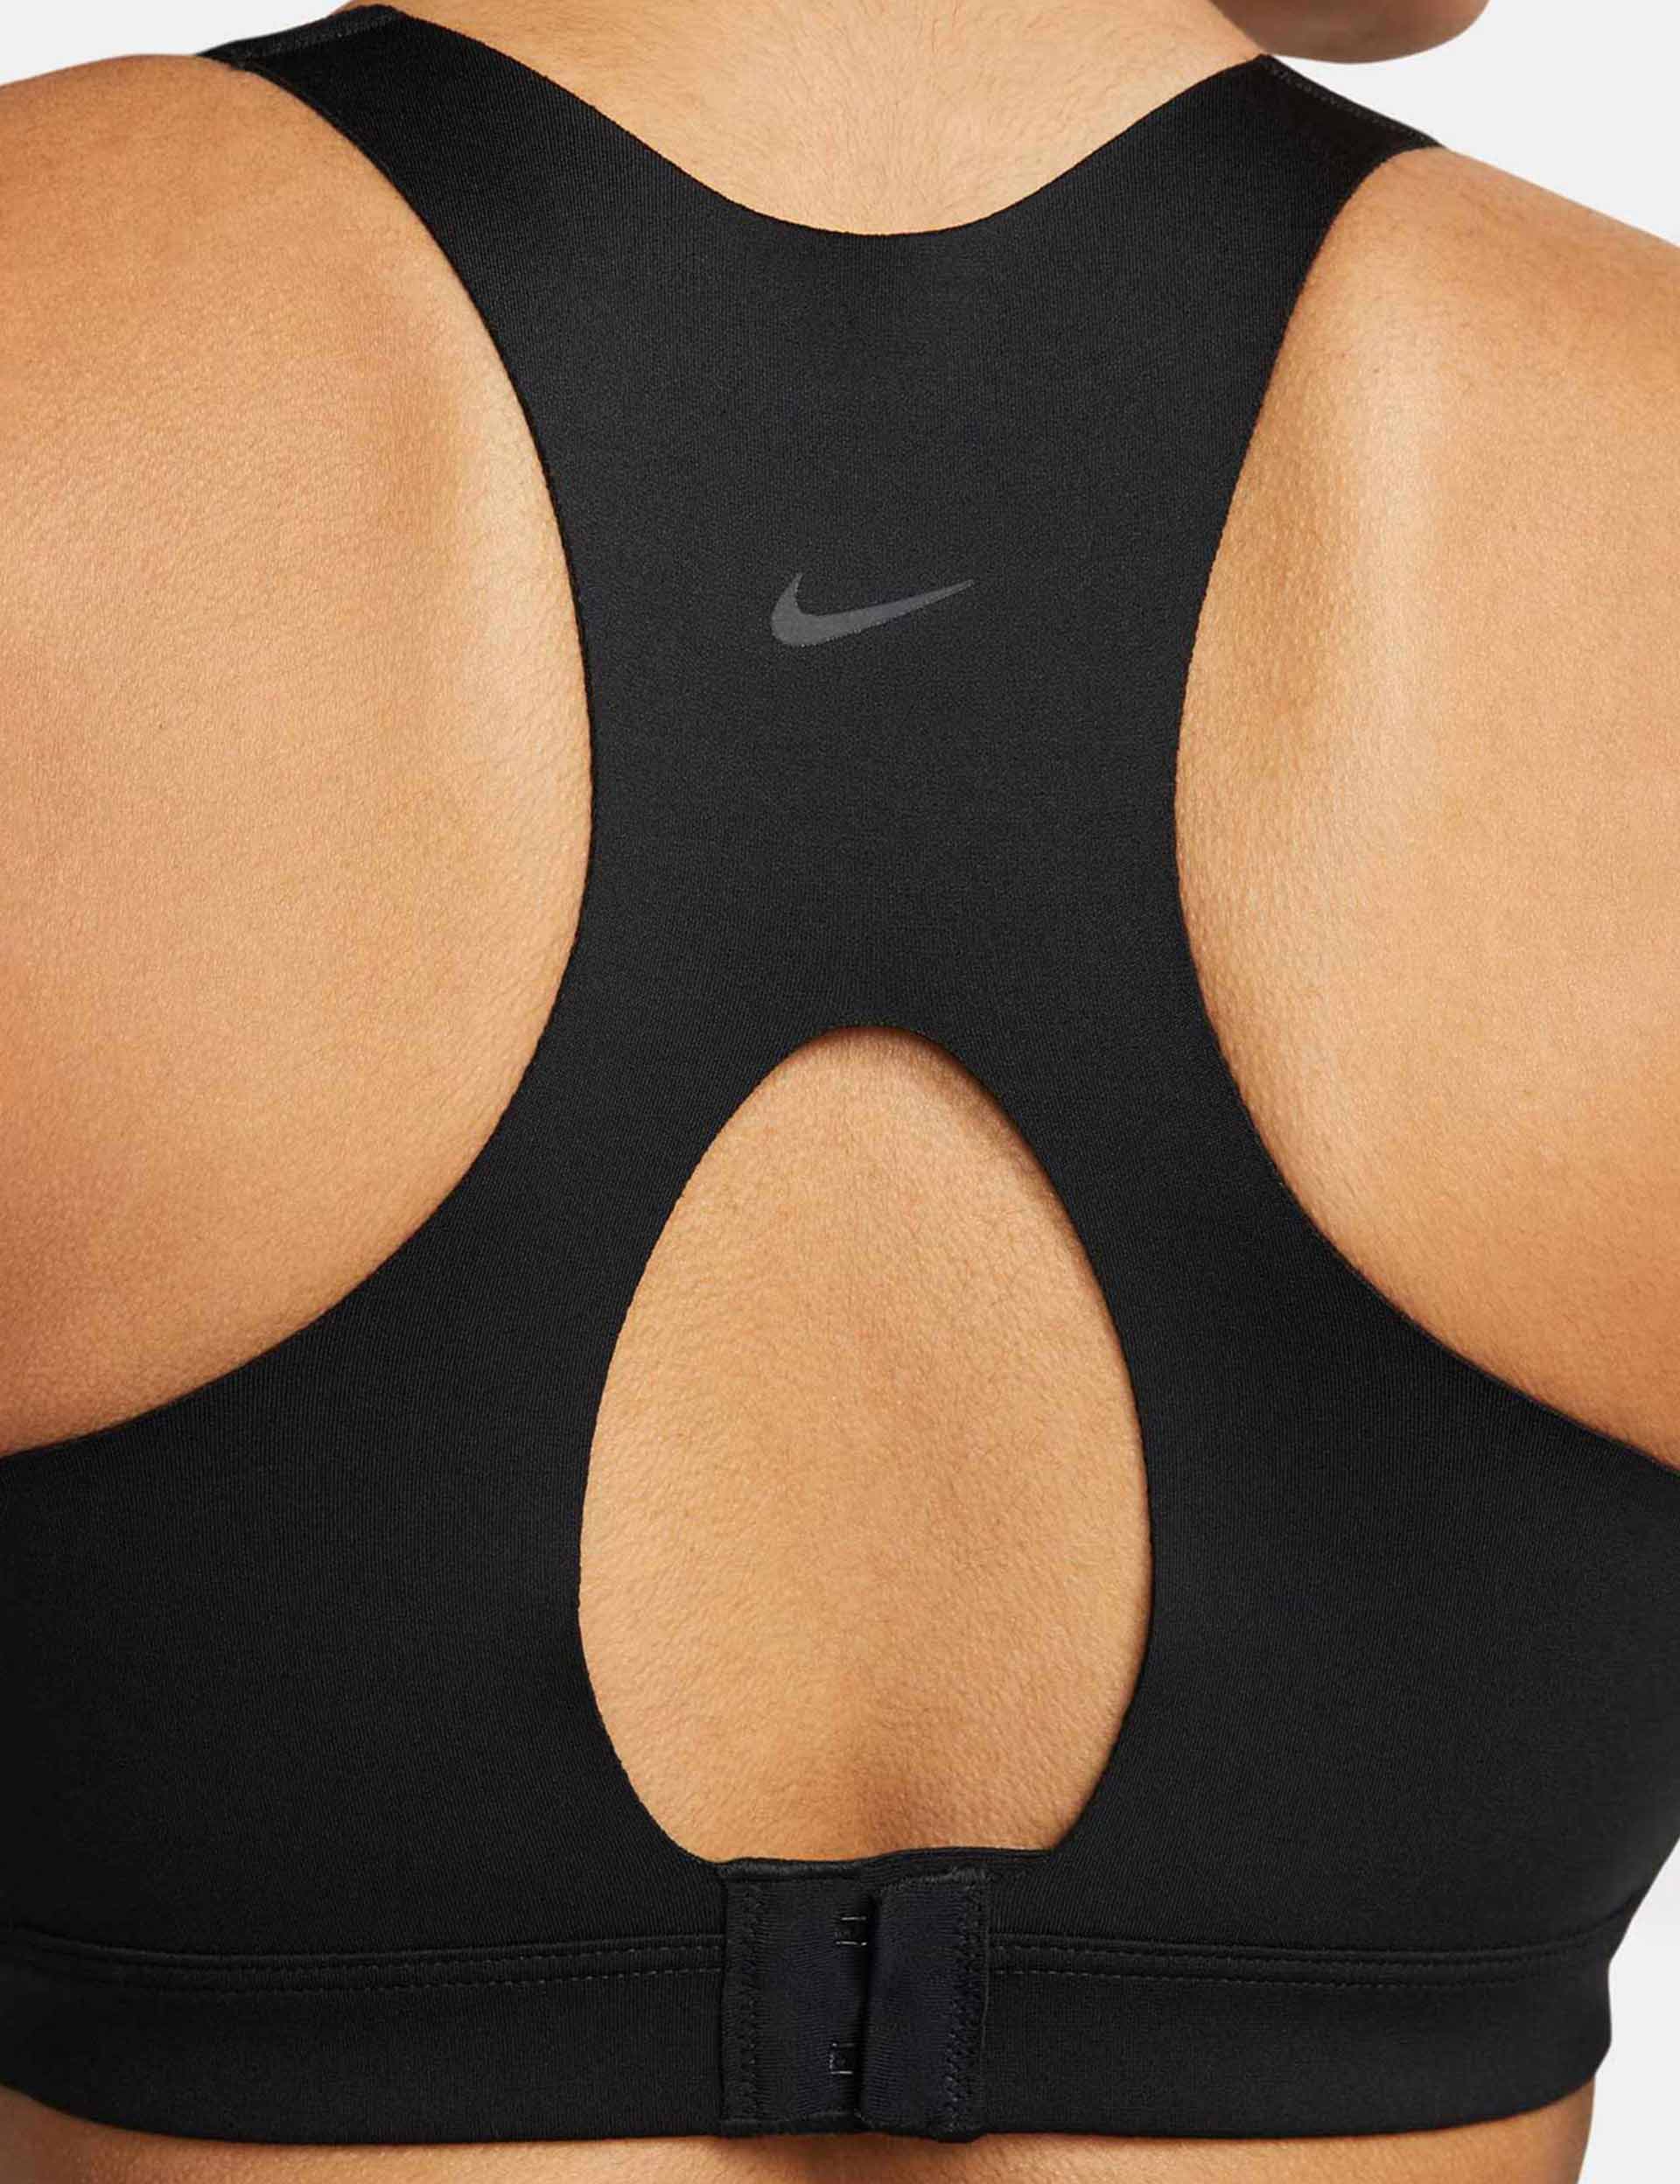 Nike Training Plus Rival high support sports bra in black